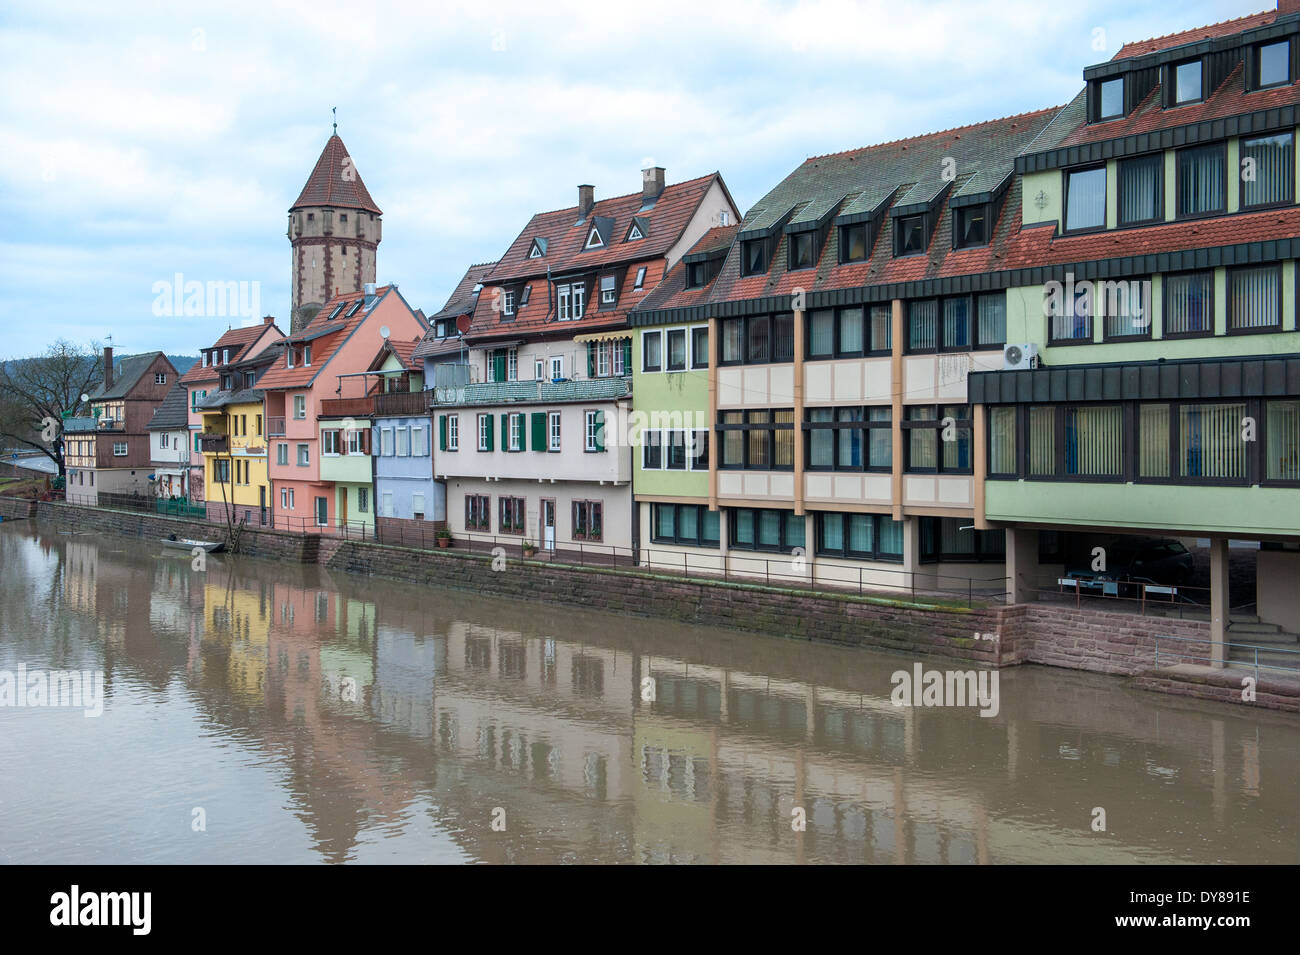 Buildings along Tauber River, Wertheim, Germany Stock Photo